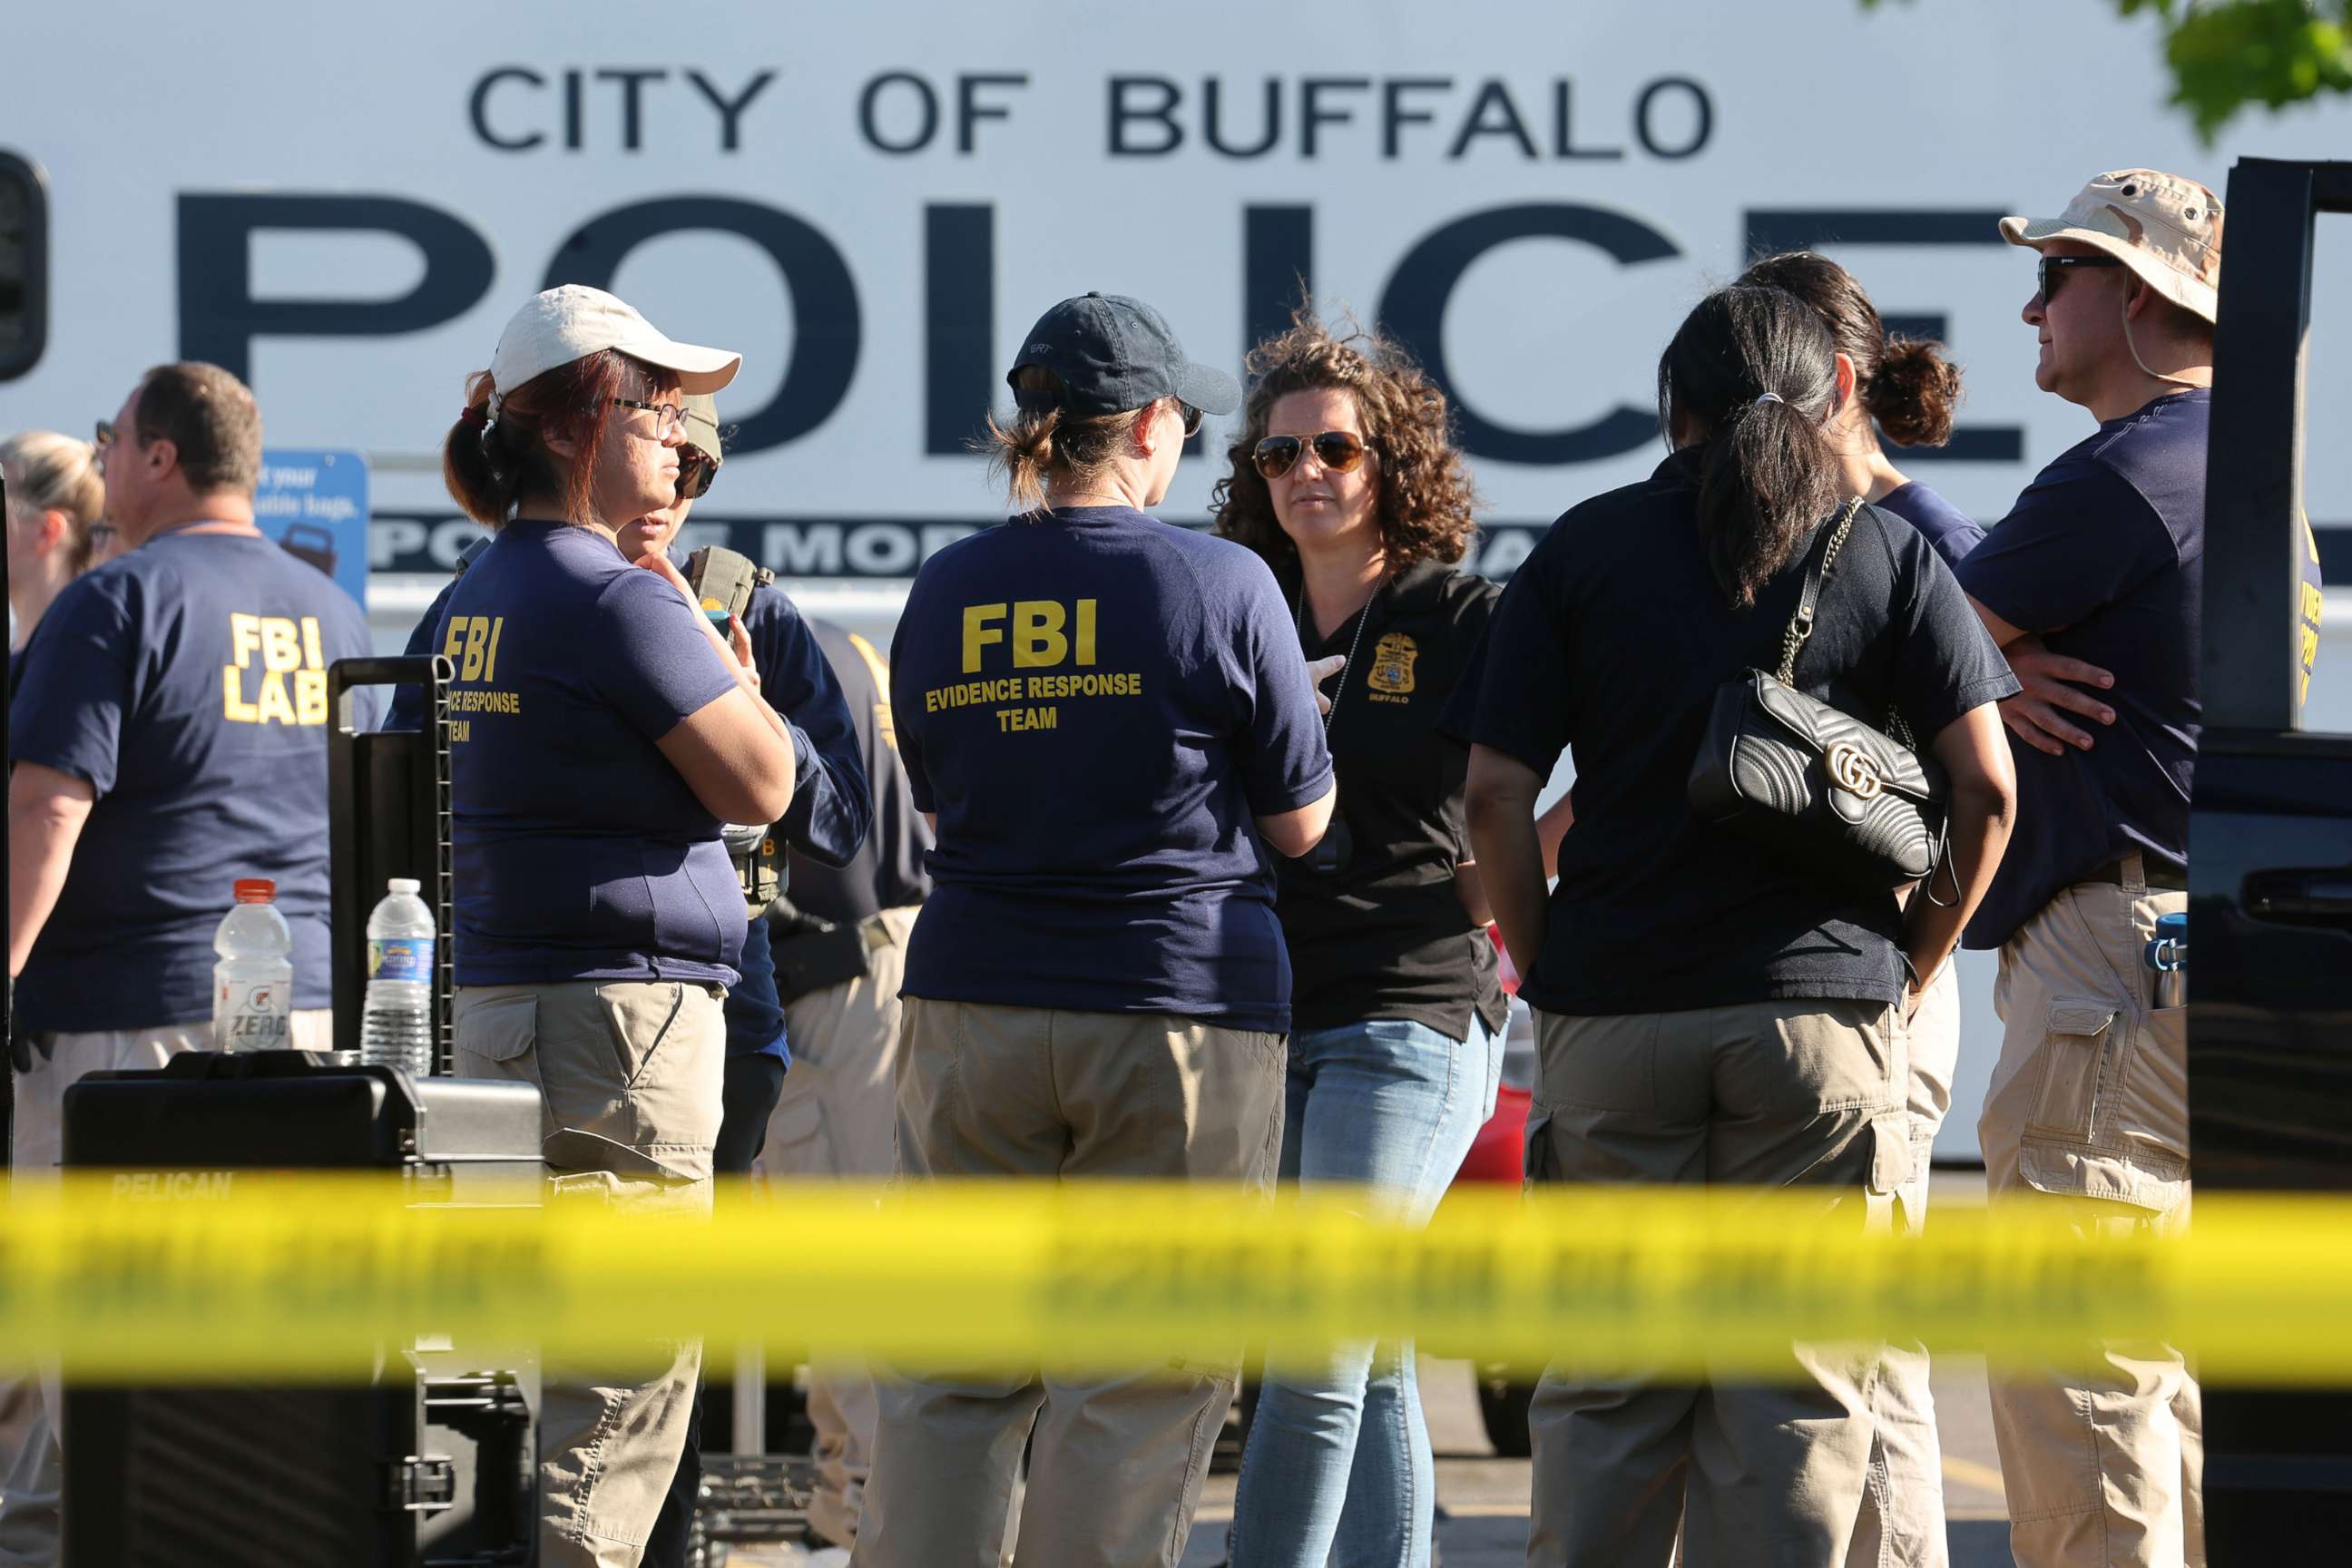 PHOTO: Police and FBI agents continue their investigation of the shootings at Tops market that killed 10 people on May 15, 2022 in Buffalo, New York.